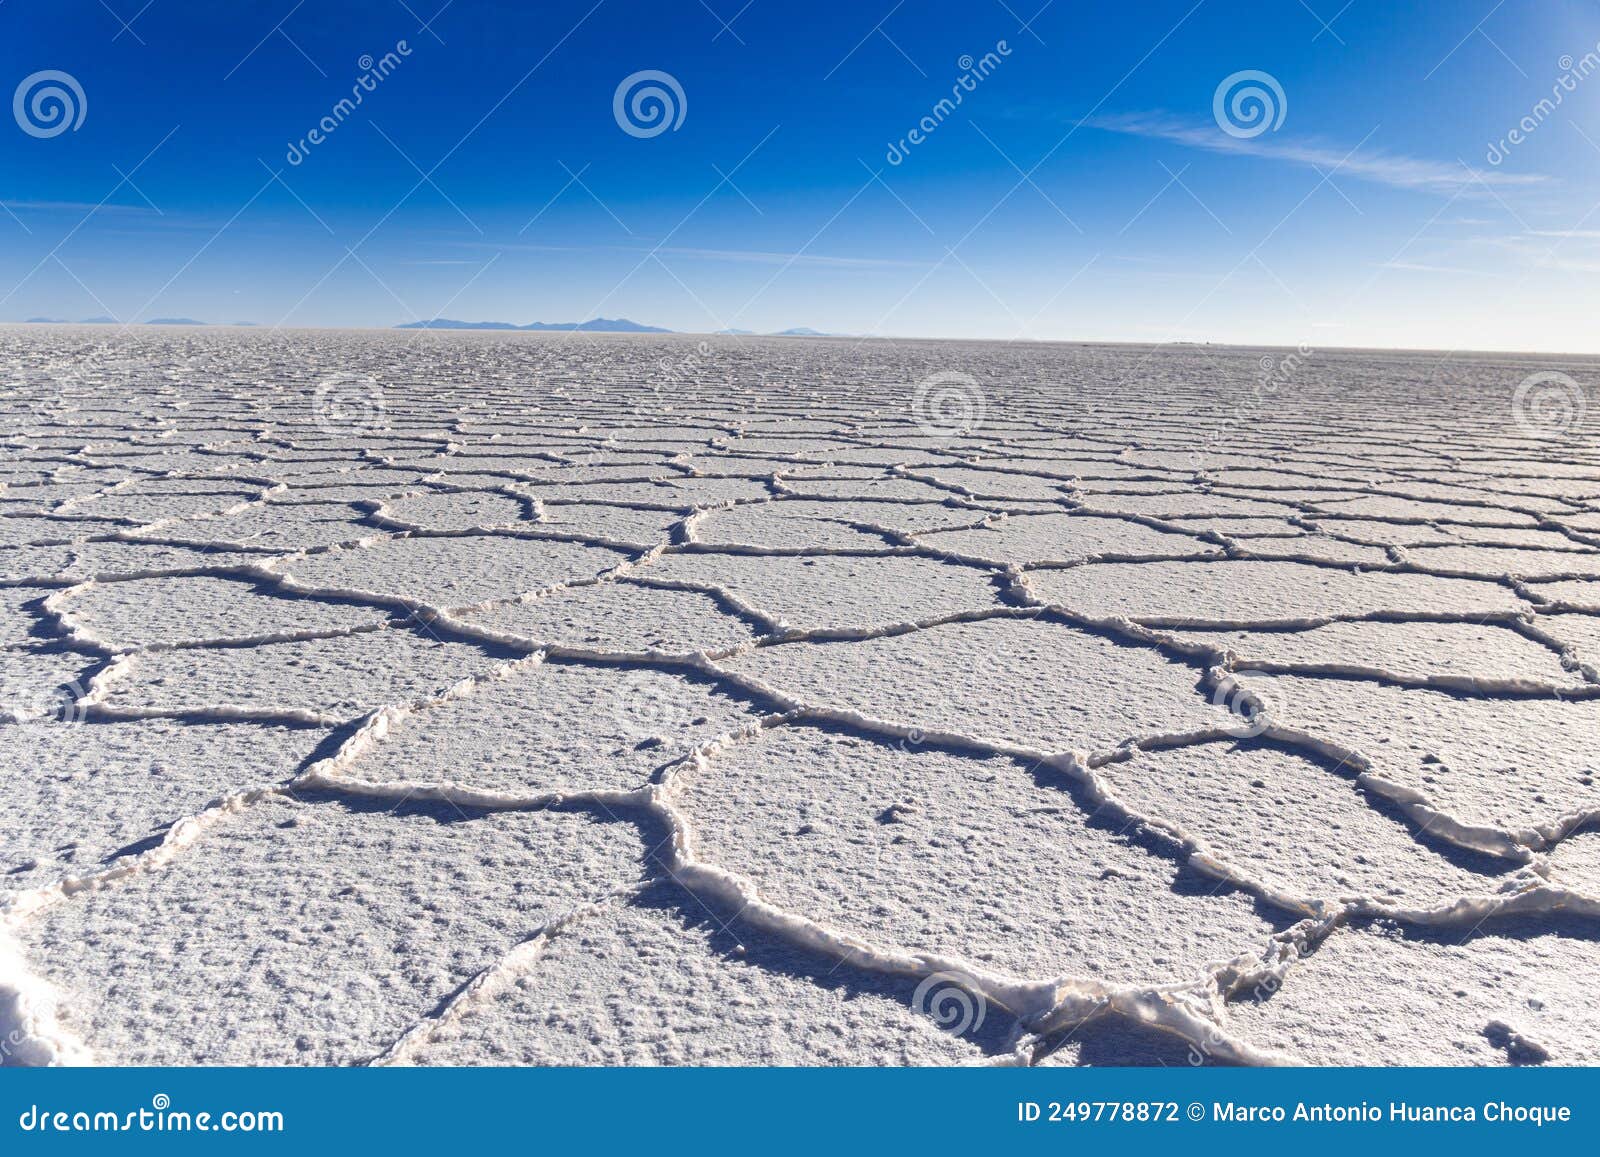 the largest salt flat in the world